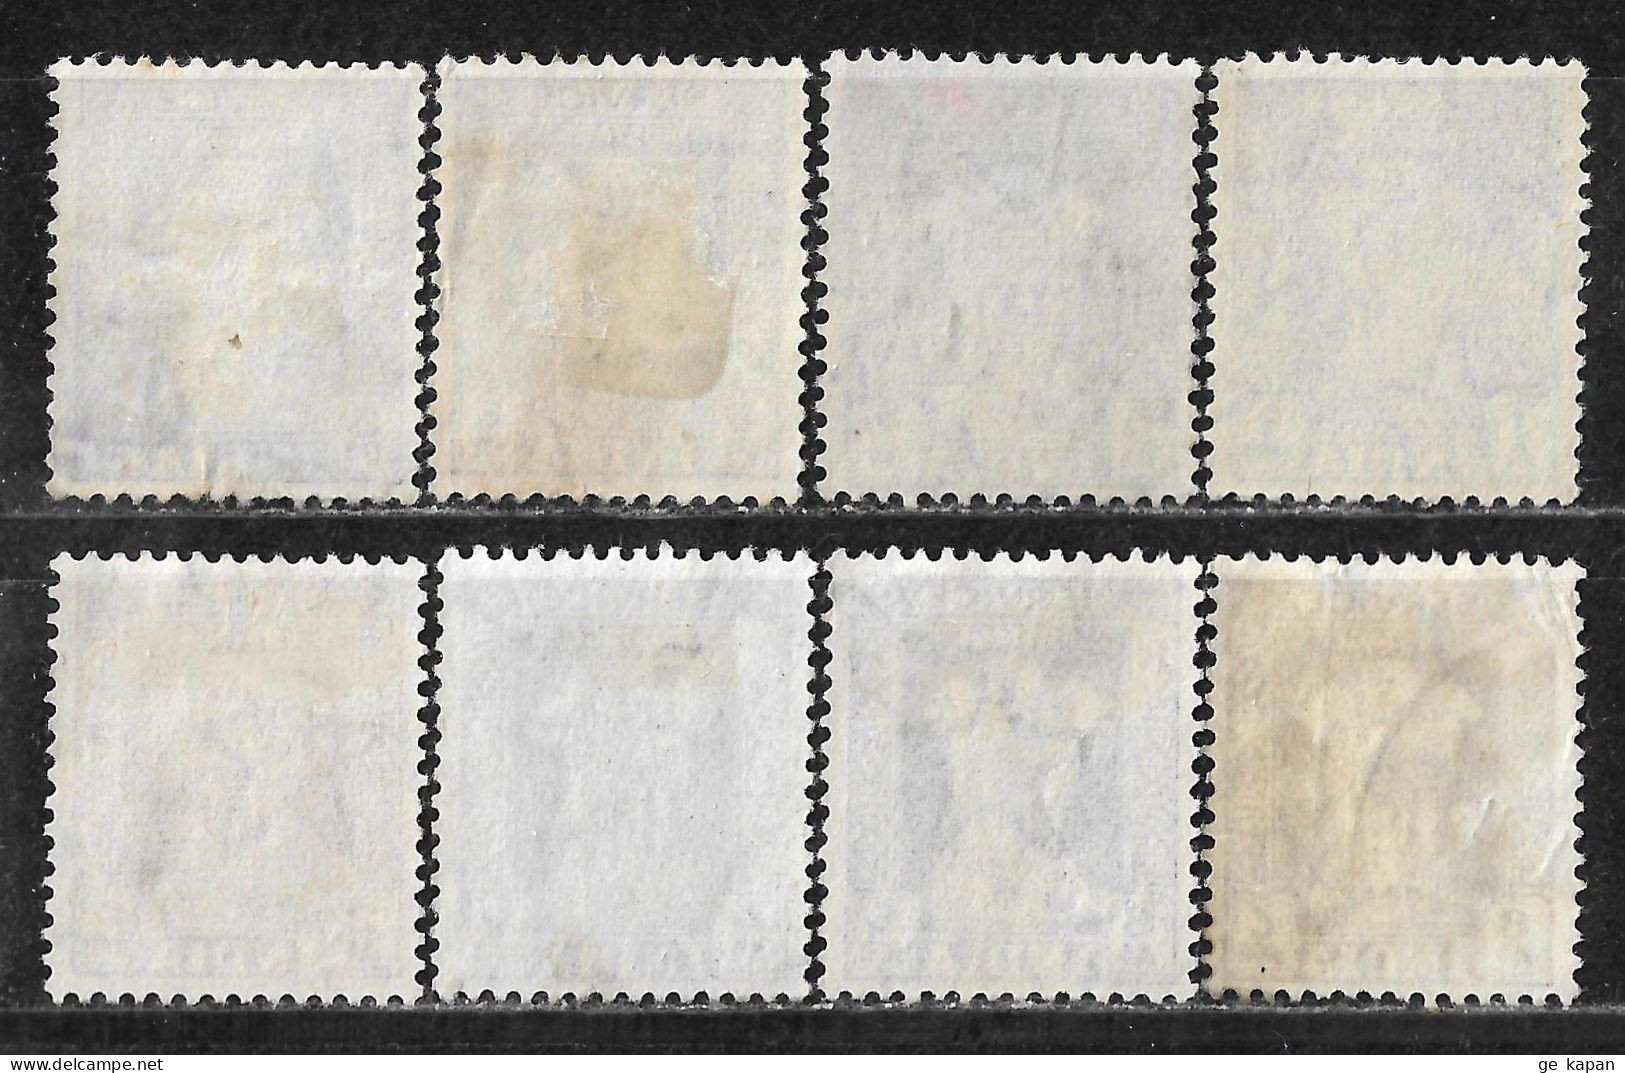 1950 INDIA SET OF 8 OFFICIAL USED STAMPS (Michel # 117-121,124-126) CV €2.20 - Timbres De Service